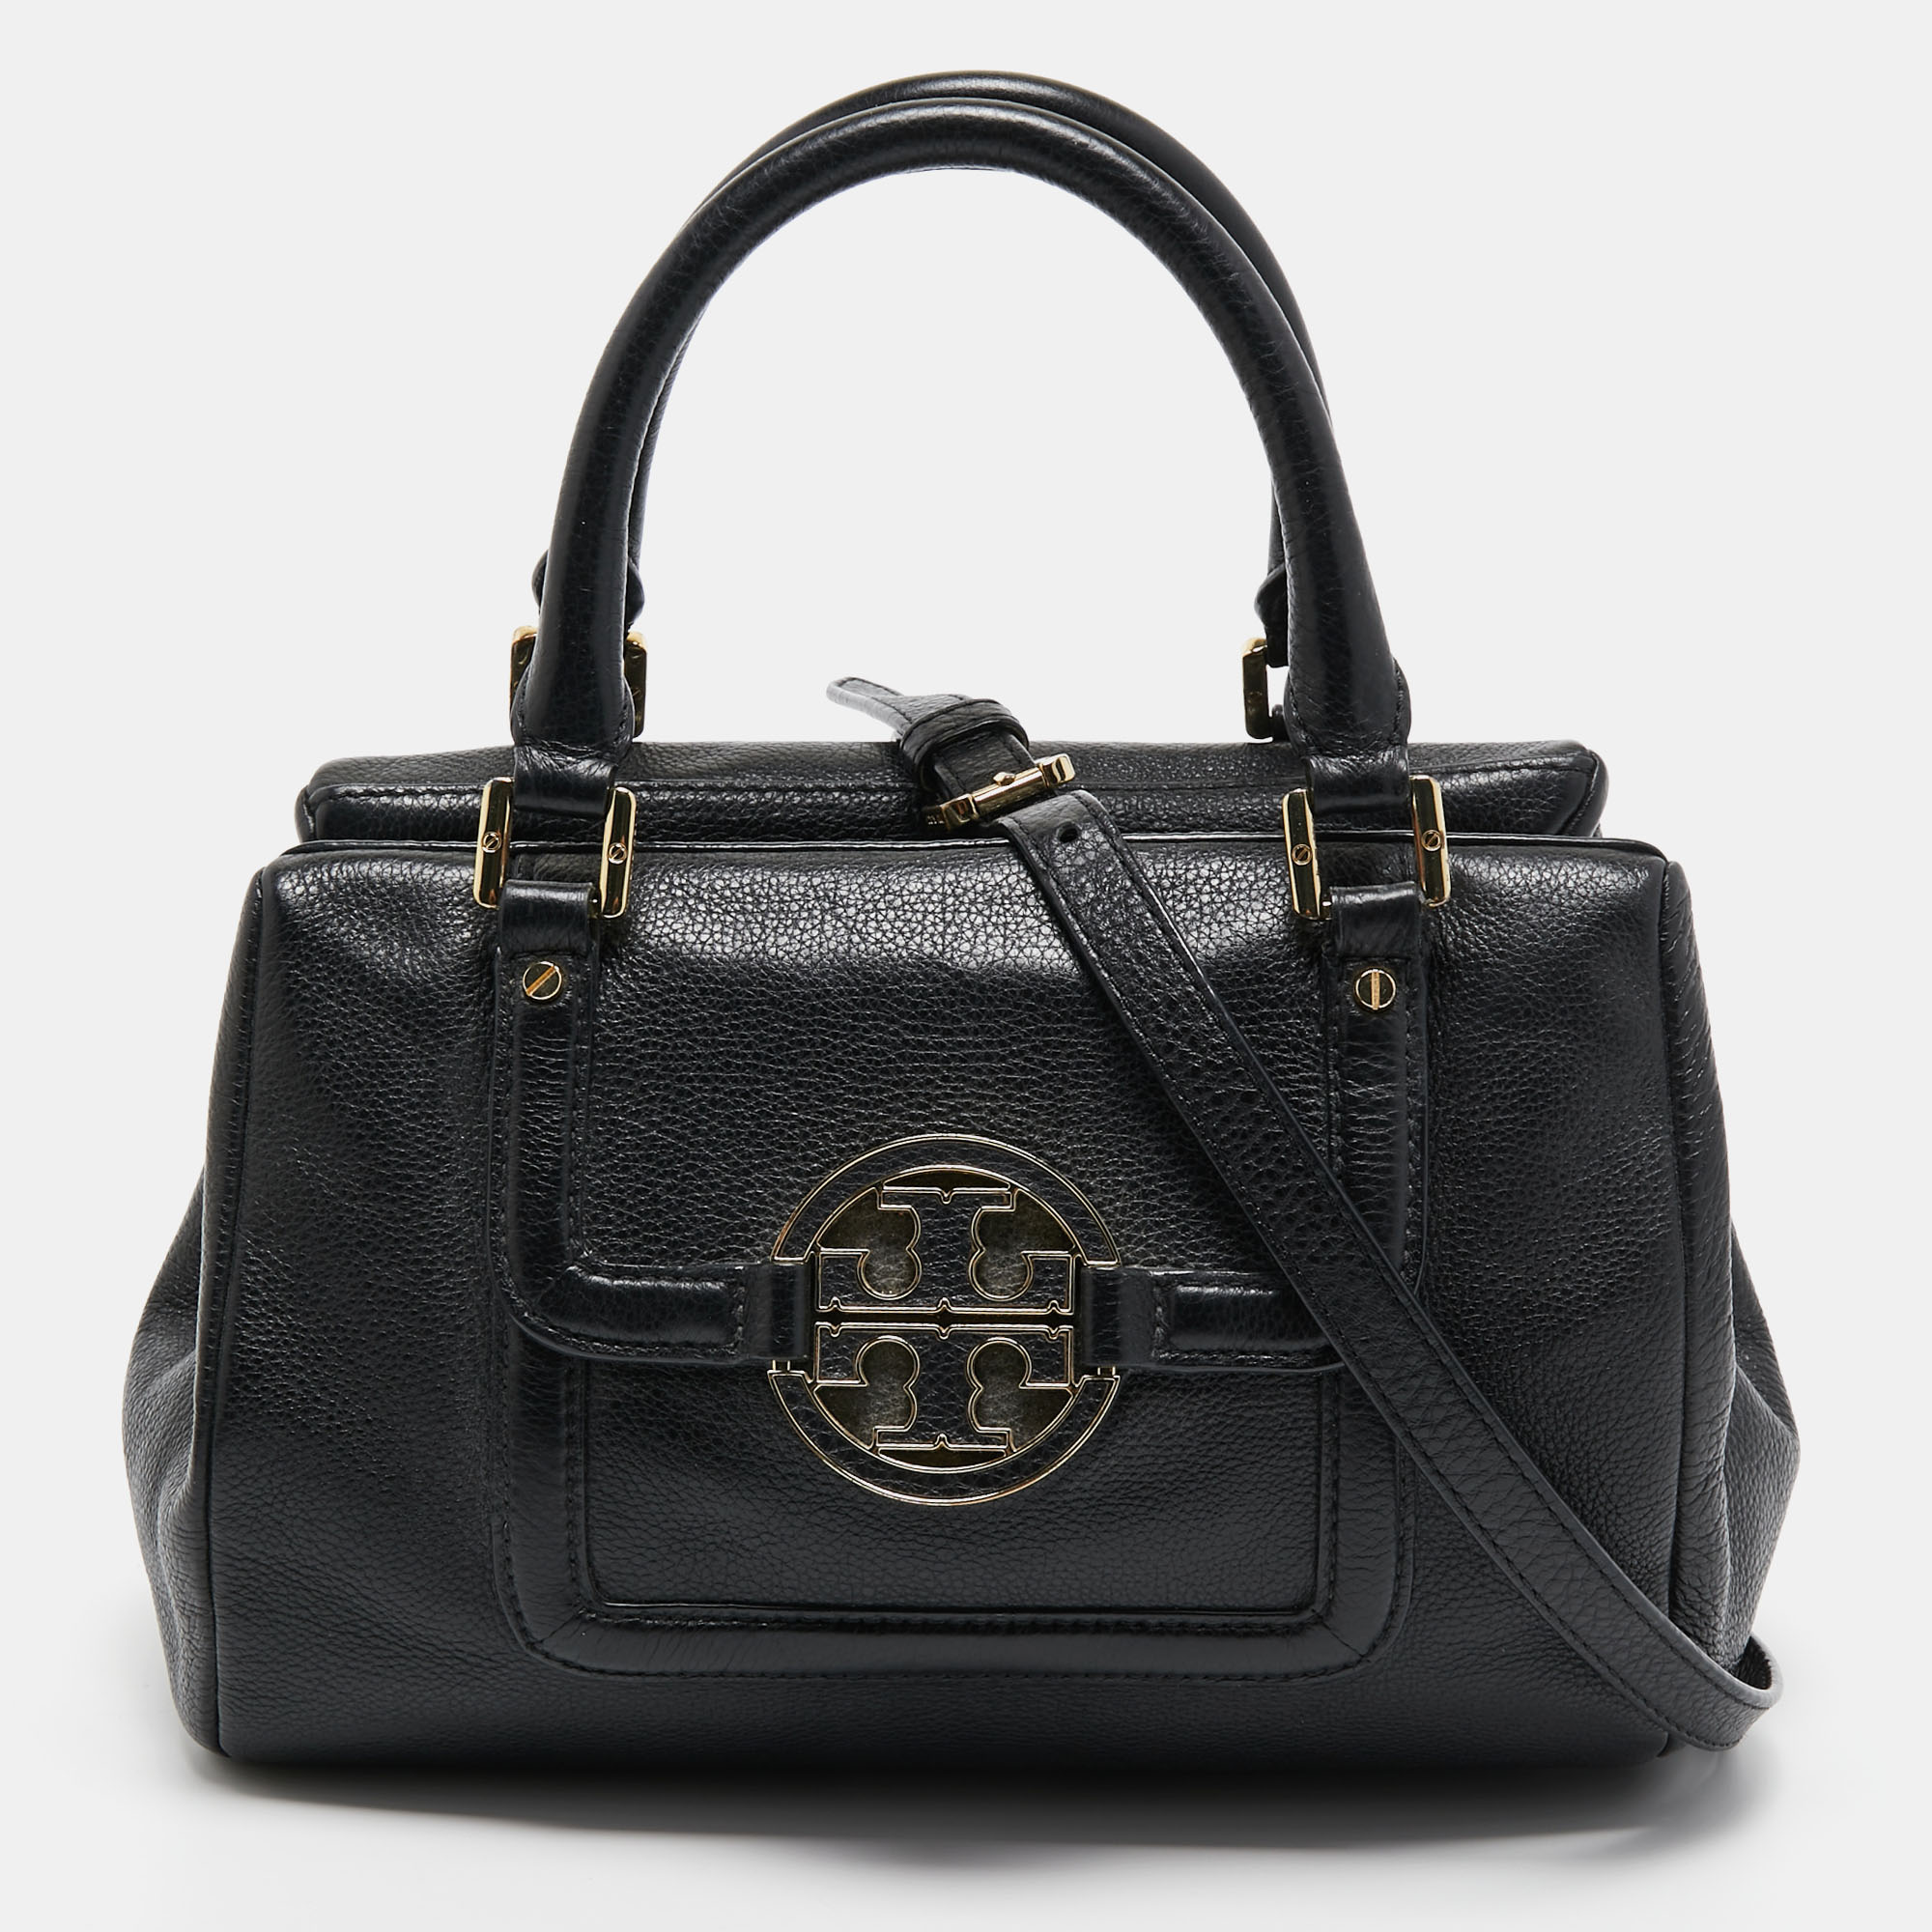 Ensure your days essentials are in order and your outfit is complete with this Tory Burch bag. Crafted using the best materials the bag carries the maisons signature of artful craftsmanship and enduring appeal.